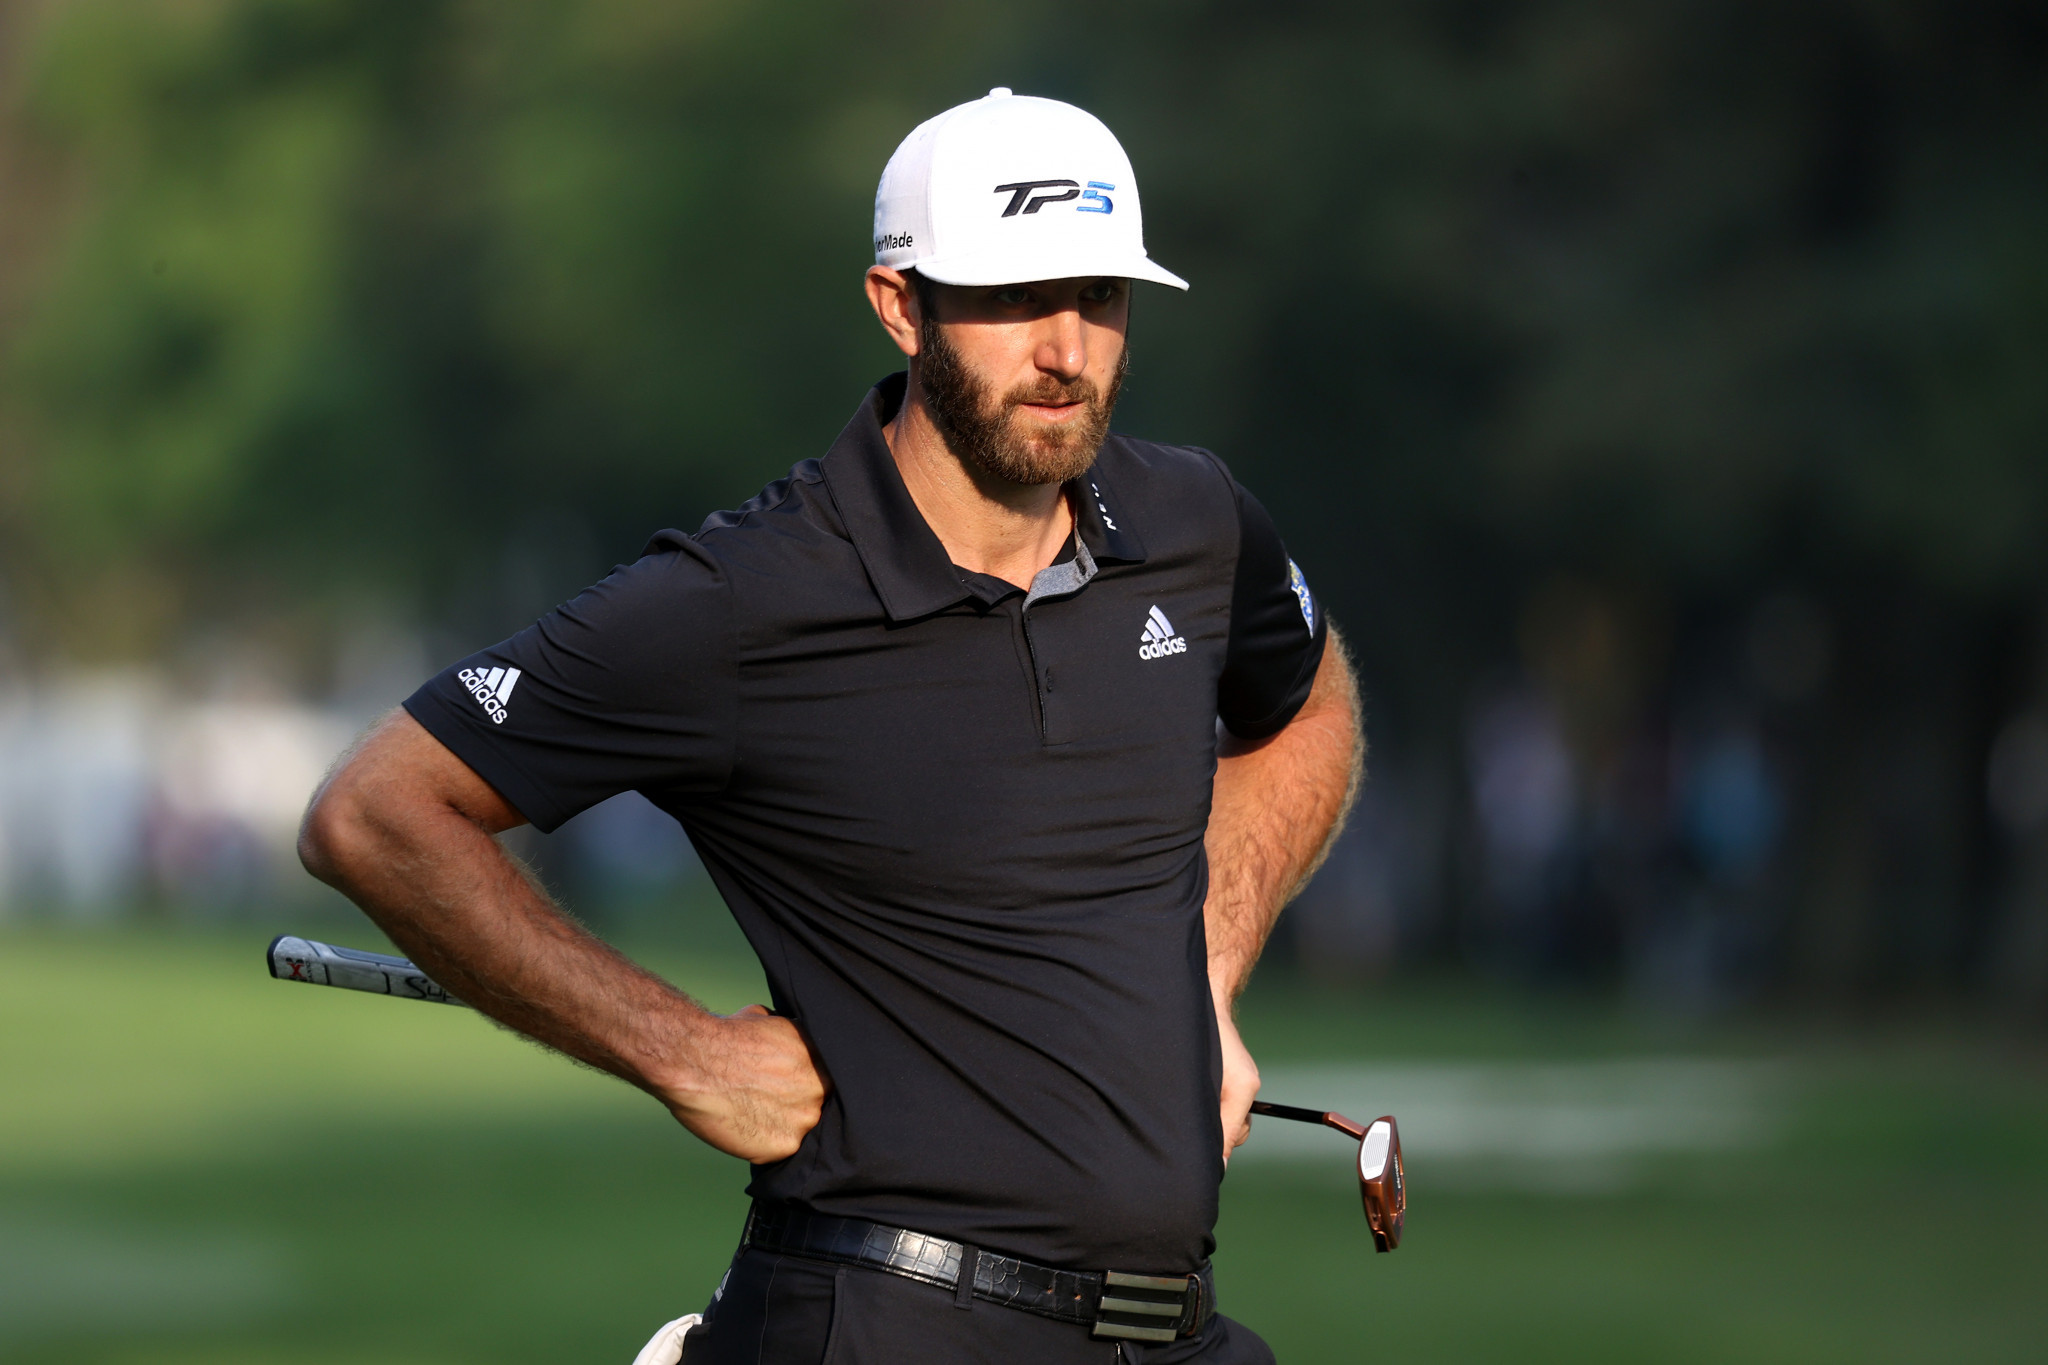 Dustin Johnson opts against participating in Tokyo 2020 golf tournament